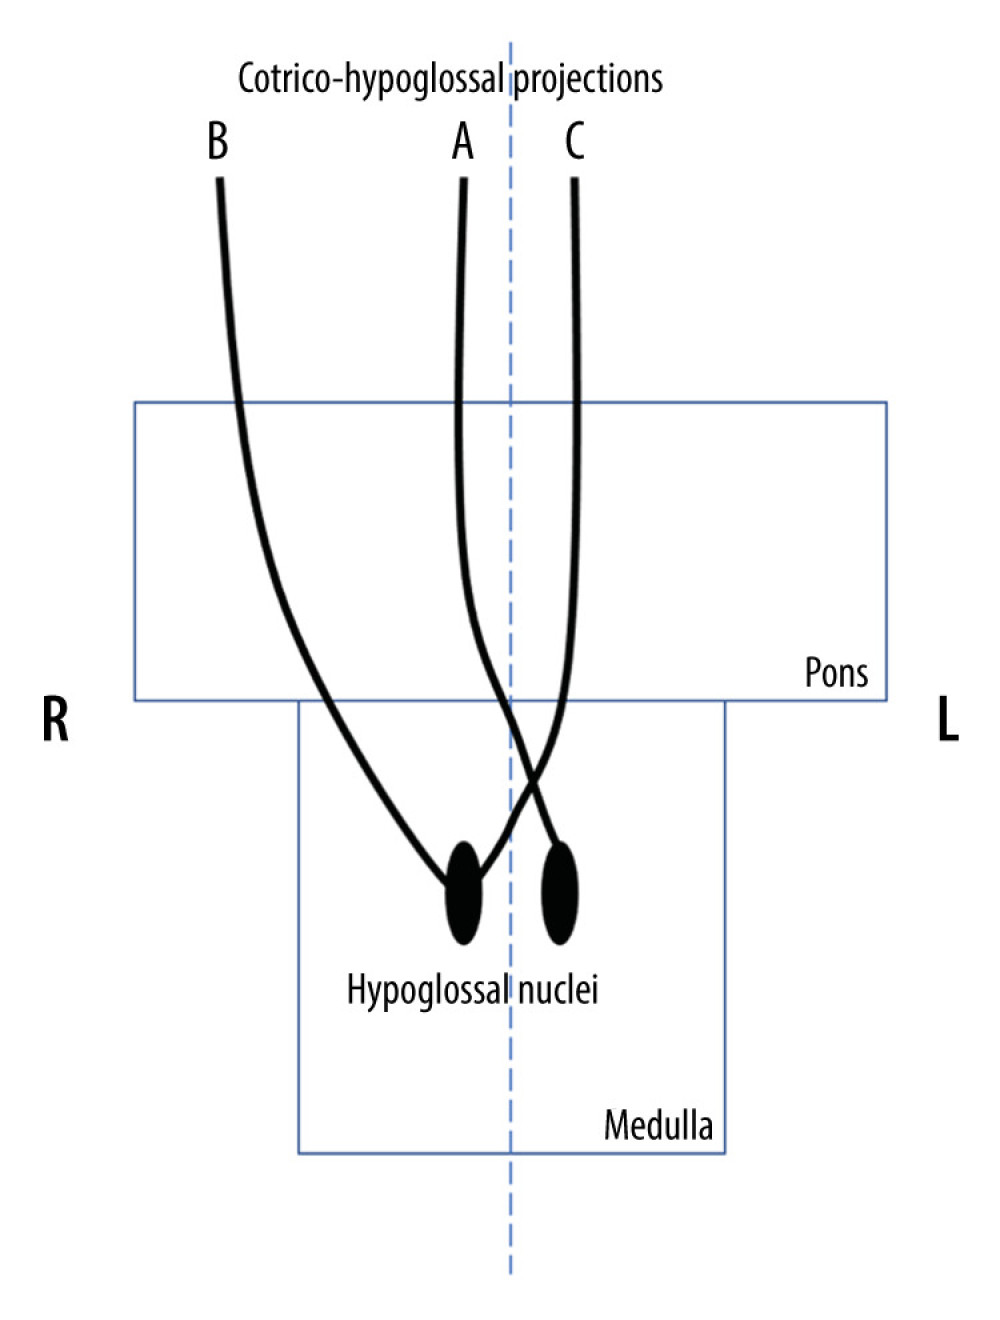 Diagrammatical representation of different patterns of the cortico-hypoglossal fibers. Diagrammatically, Line A represents contralateral cortico-hypoglossal fibers that decussate at the pontomedullary junction; Line B represents ipsilateral cortico-hypoglossal fibers; Line C represents the contralateral cortico-hypoglossal fibers with decussation different from the pontomedullary junction (more caudal in this case).